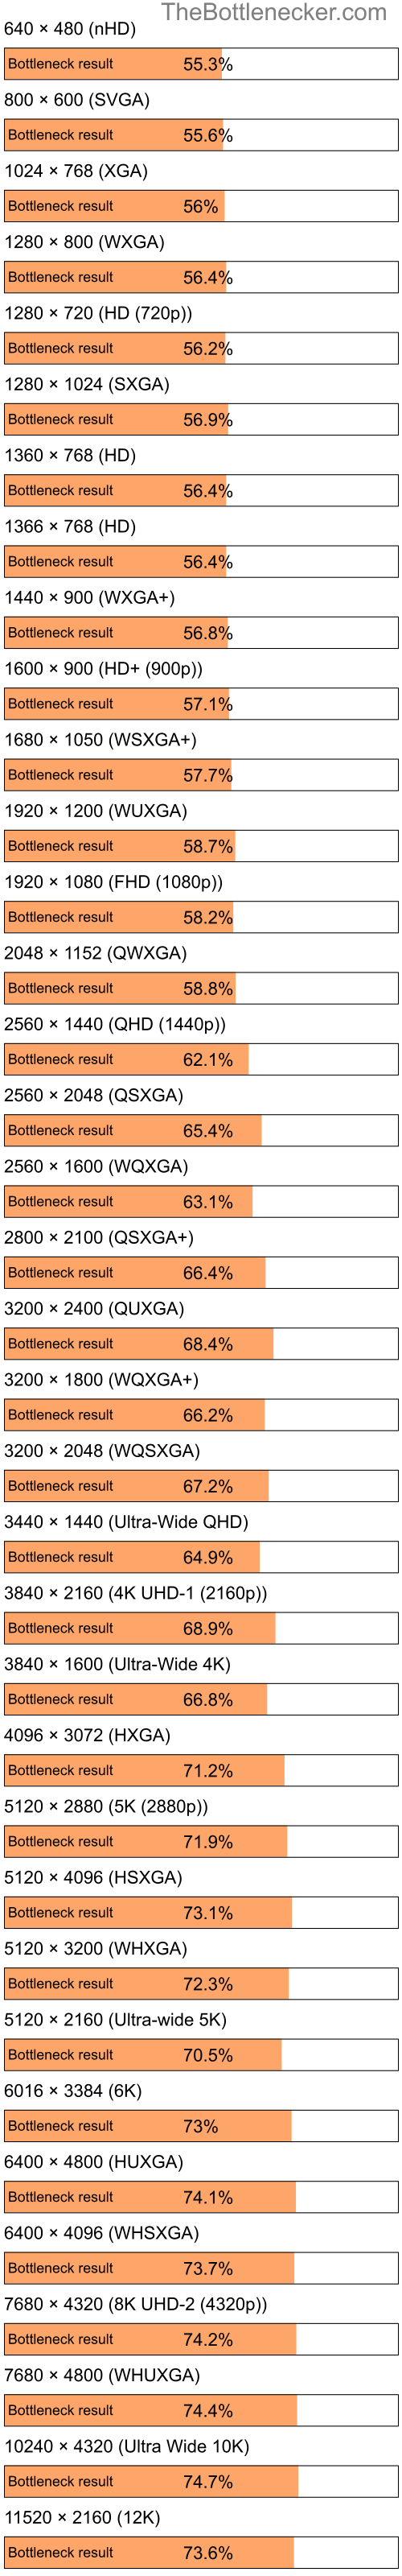 Bottleneck results by resolution for Intel Celeron M 420 and AMD Mobility Radeon HD 3470 in Processor Intense Tasks